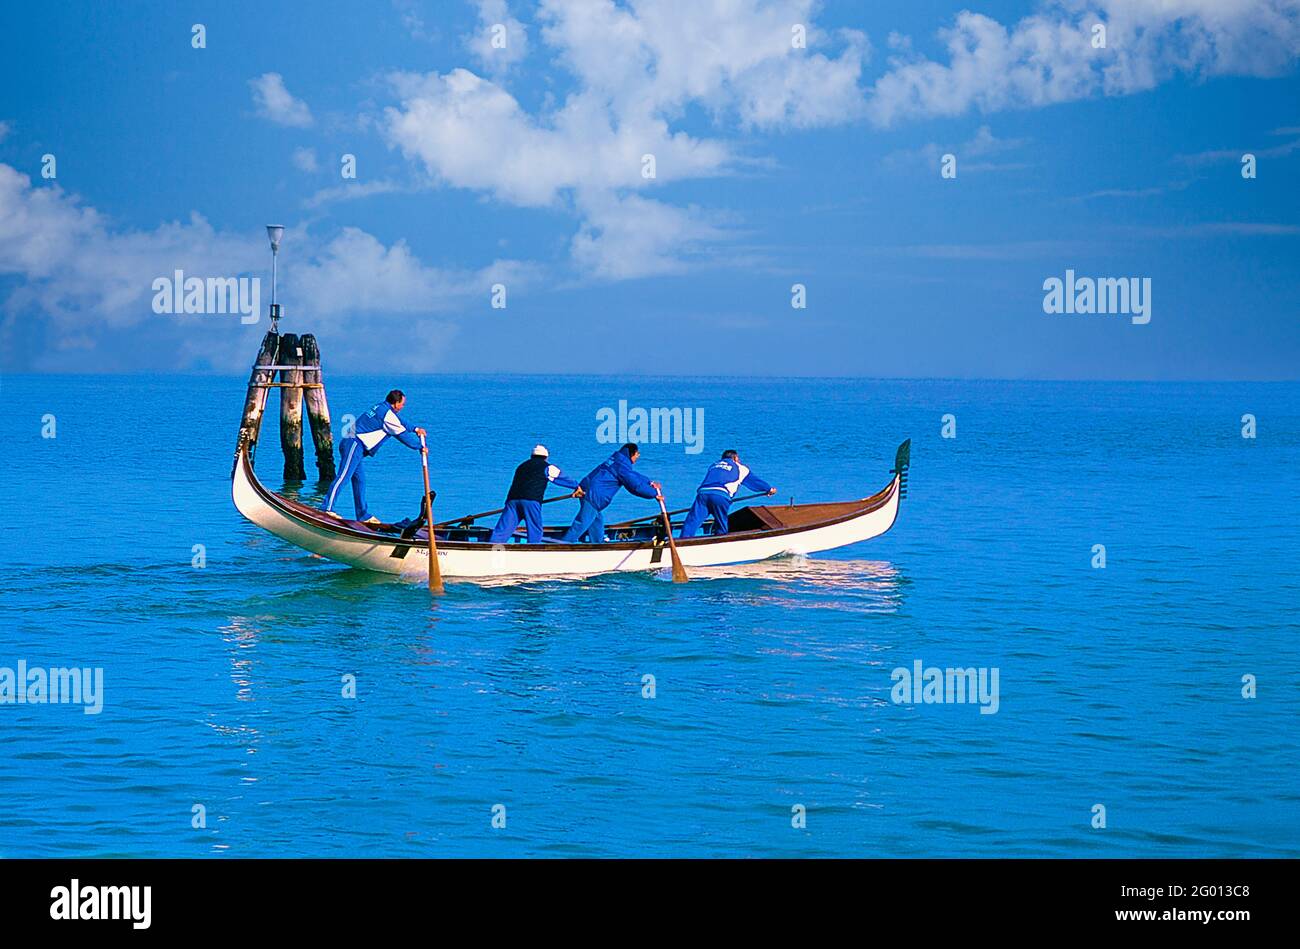 Image of a four man team training for a regatta in the Venice Lagoon. Stock Photo